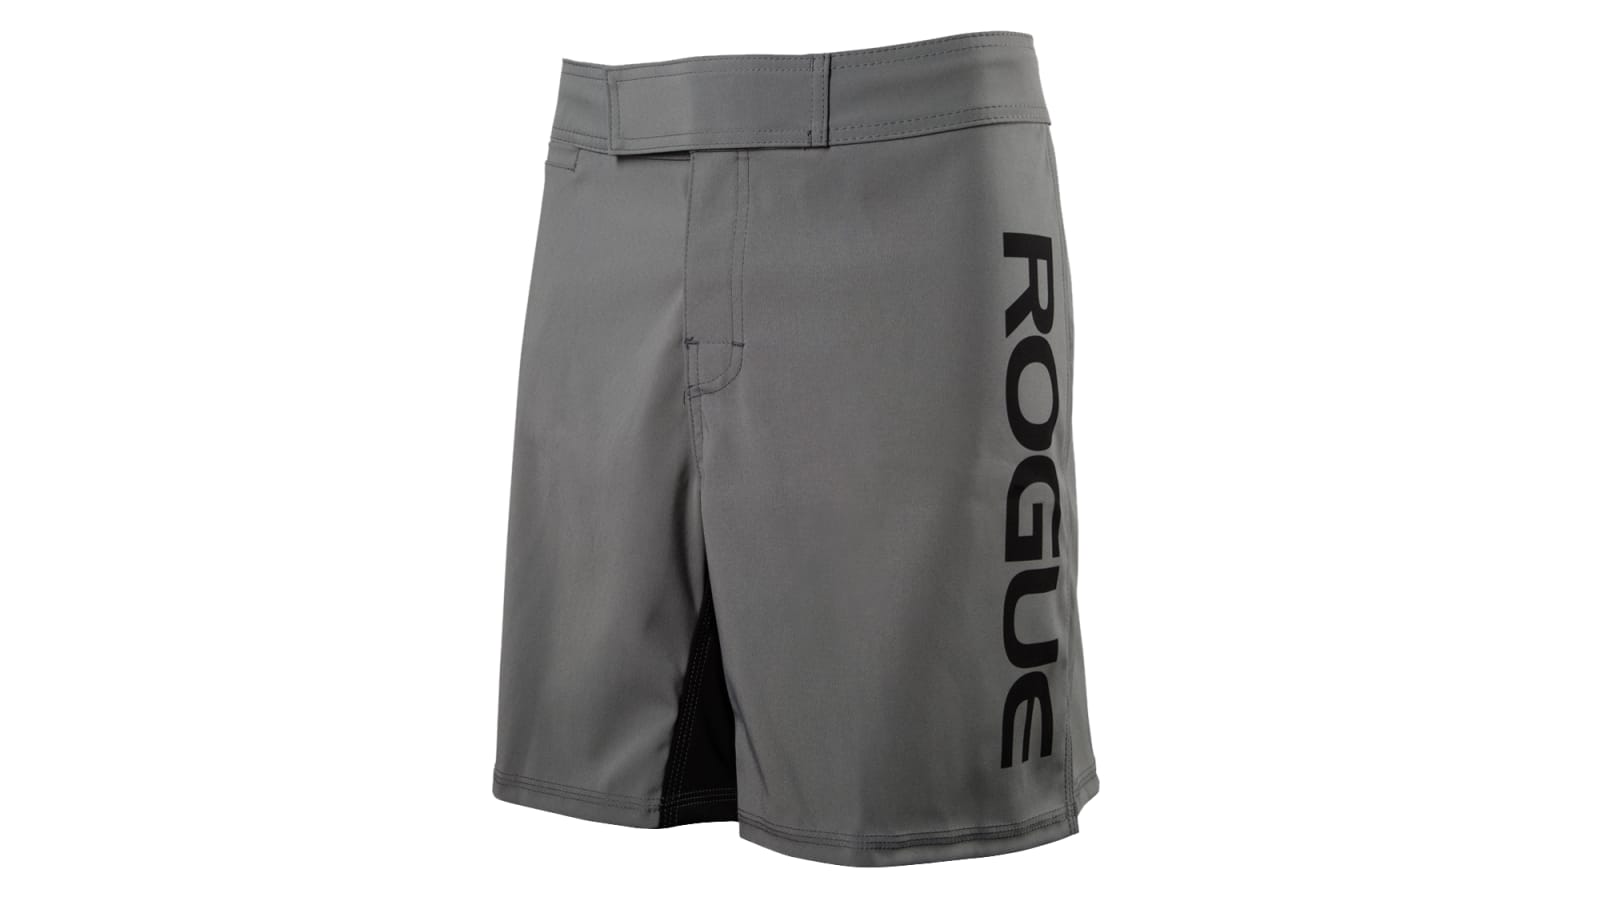 Rogue Fight Shorts 2.0 - MMA Training - 100% Polyester - Gray